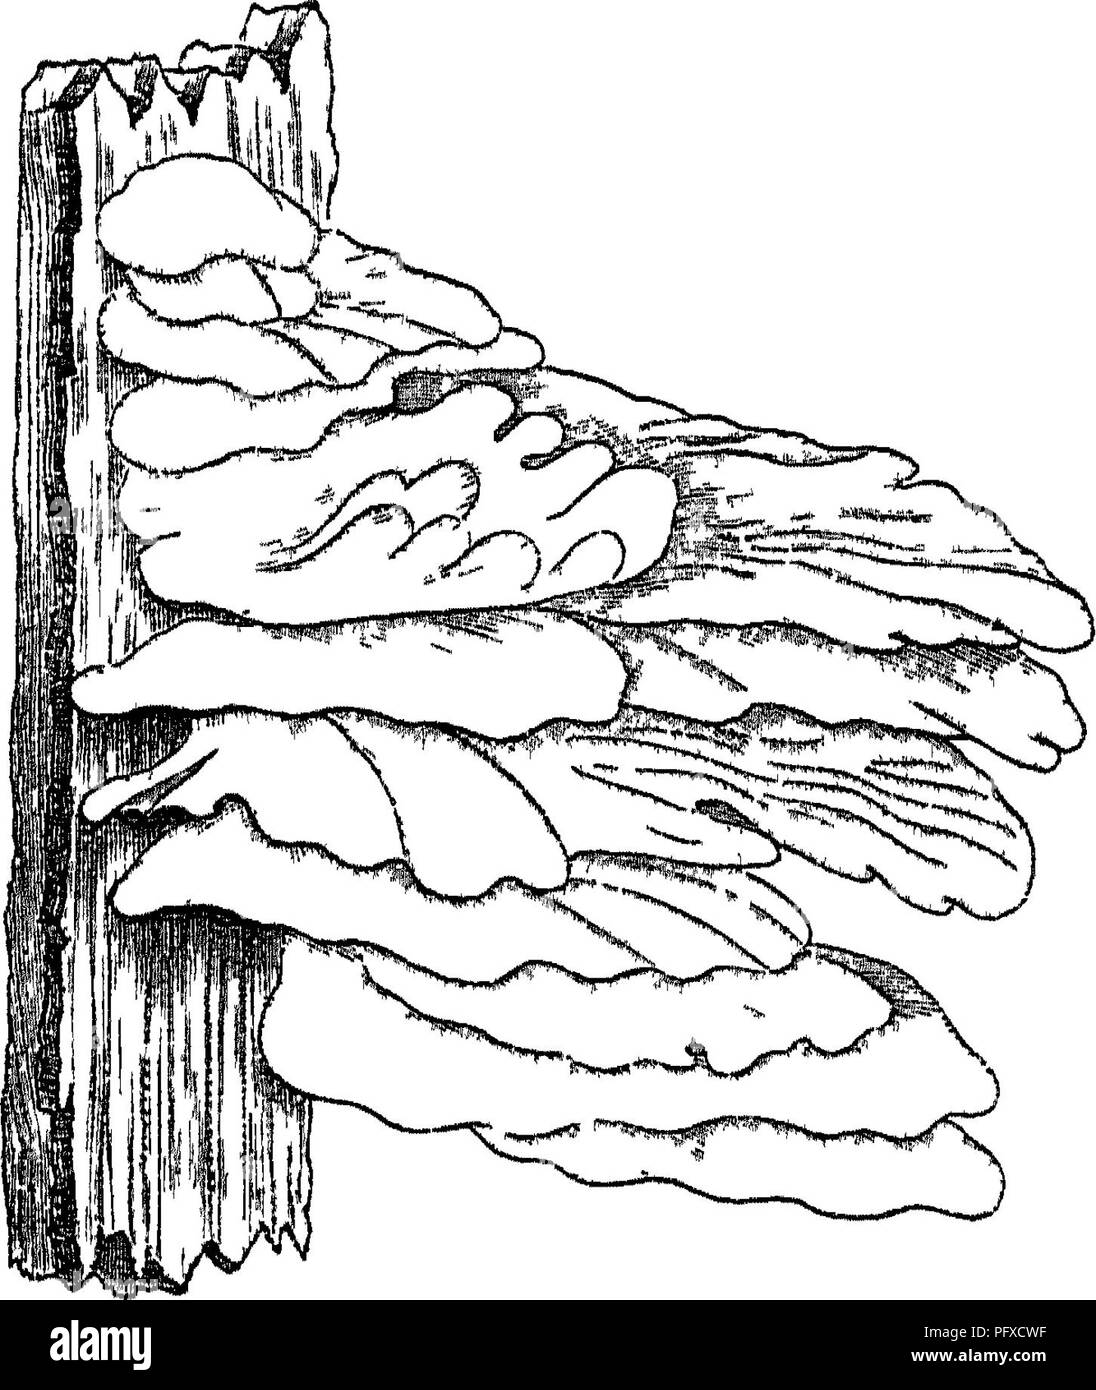 . Timber and some of its diseases. Timber; Trees. n] POLYPORUS SULPHUREUS. 165 One of the commonest of these is Polypoms sul- phureus (Fig. 17), which does great injury to all kinds of standing timber, especially the oak, poplar, willow, hazel, pear, larch, and others. It is probably well. â &quot;-^^ . ) Fig 17 âPolyporia suiphuri.Hi portion of tht fungii'!. sprmgiug from i piece of Lj.iT&gt; (ALftei Hartig ) known to most foresters, as its fructification projects horizontally from the diseased trunks as tiers of bracket-shaped bodies of a cheese-like consistency : bright yellow below, where  Stock Photo